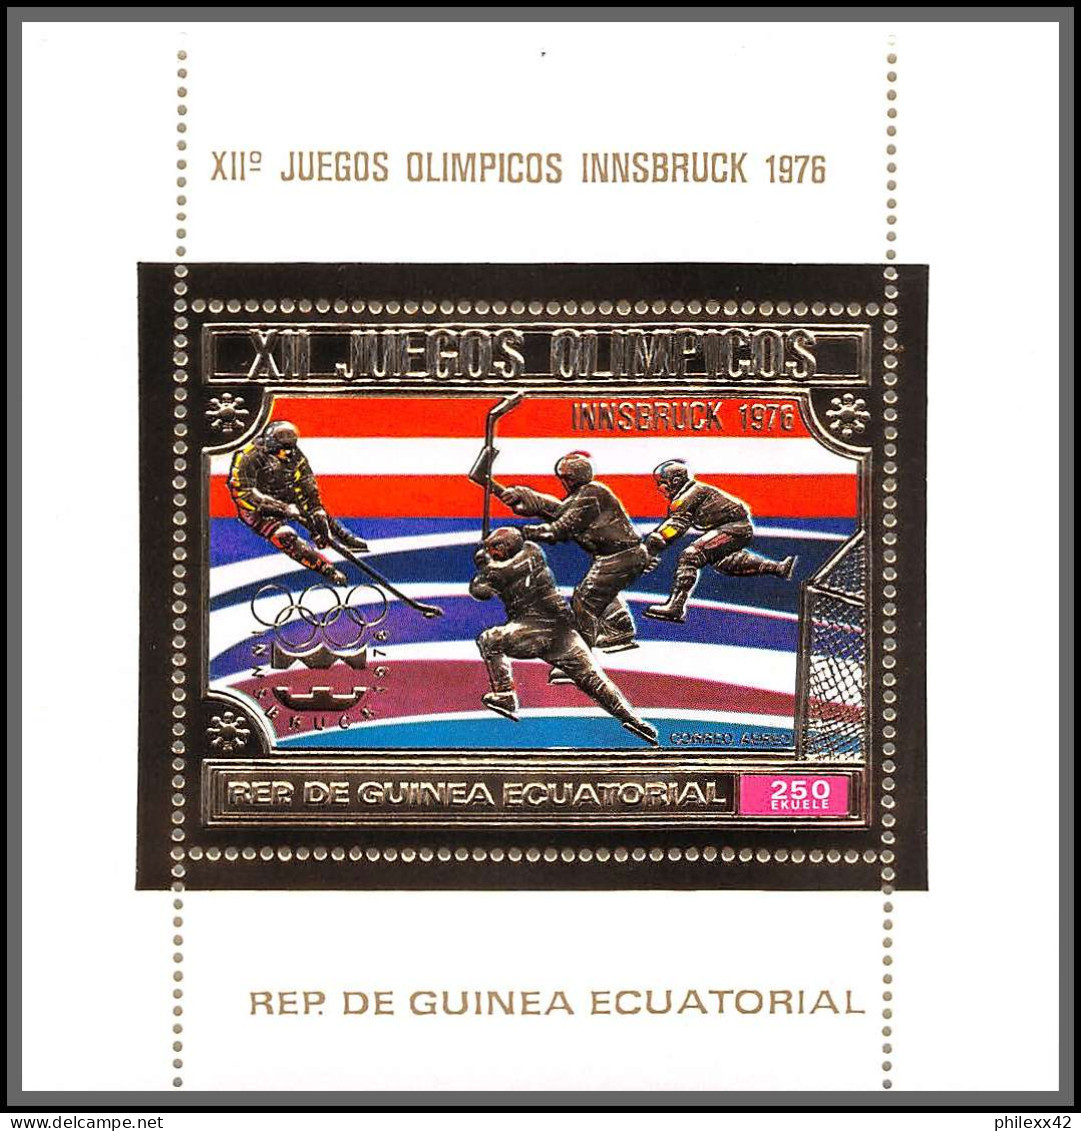 86345 Mi Bl 161 Innsbruck 1976 HOCKEY Jeux Olympiques (olympic Games) 1975 Guinée équatoriale Guinea OR Gold - Inverno1976: Innsbruck